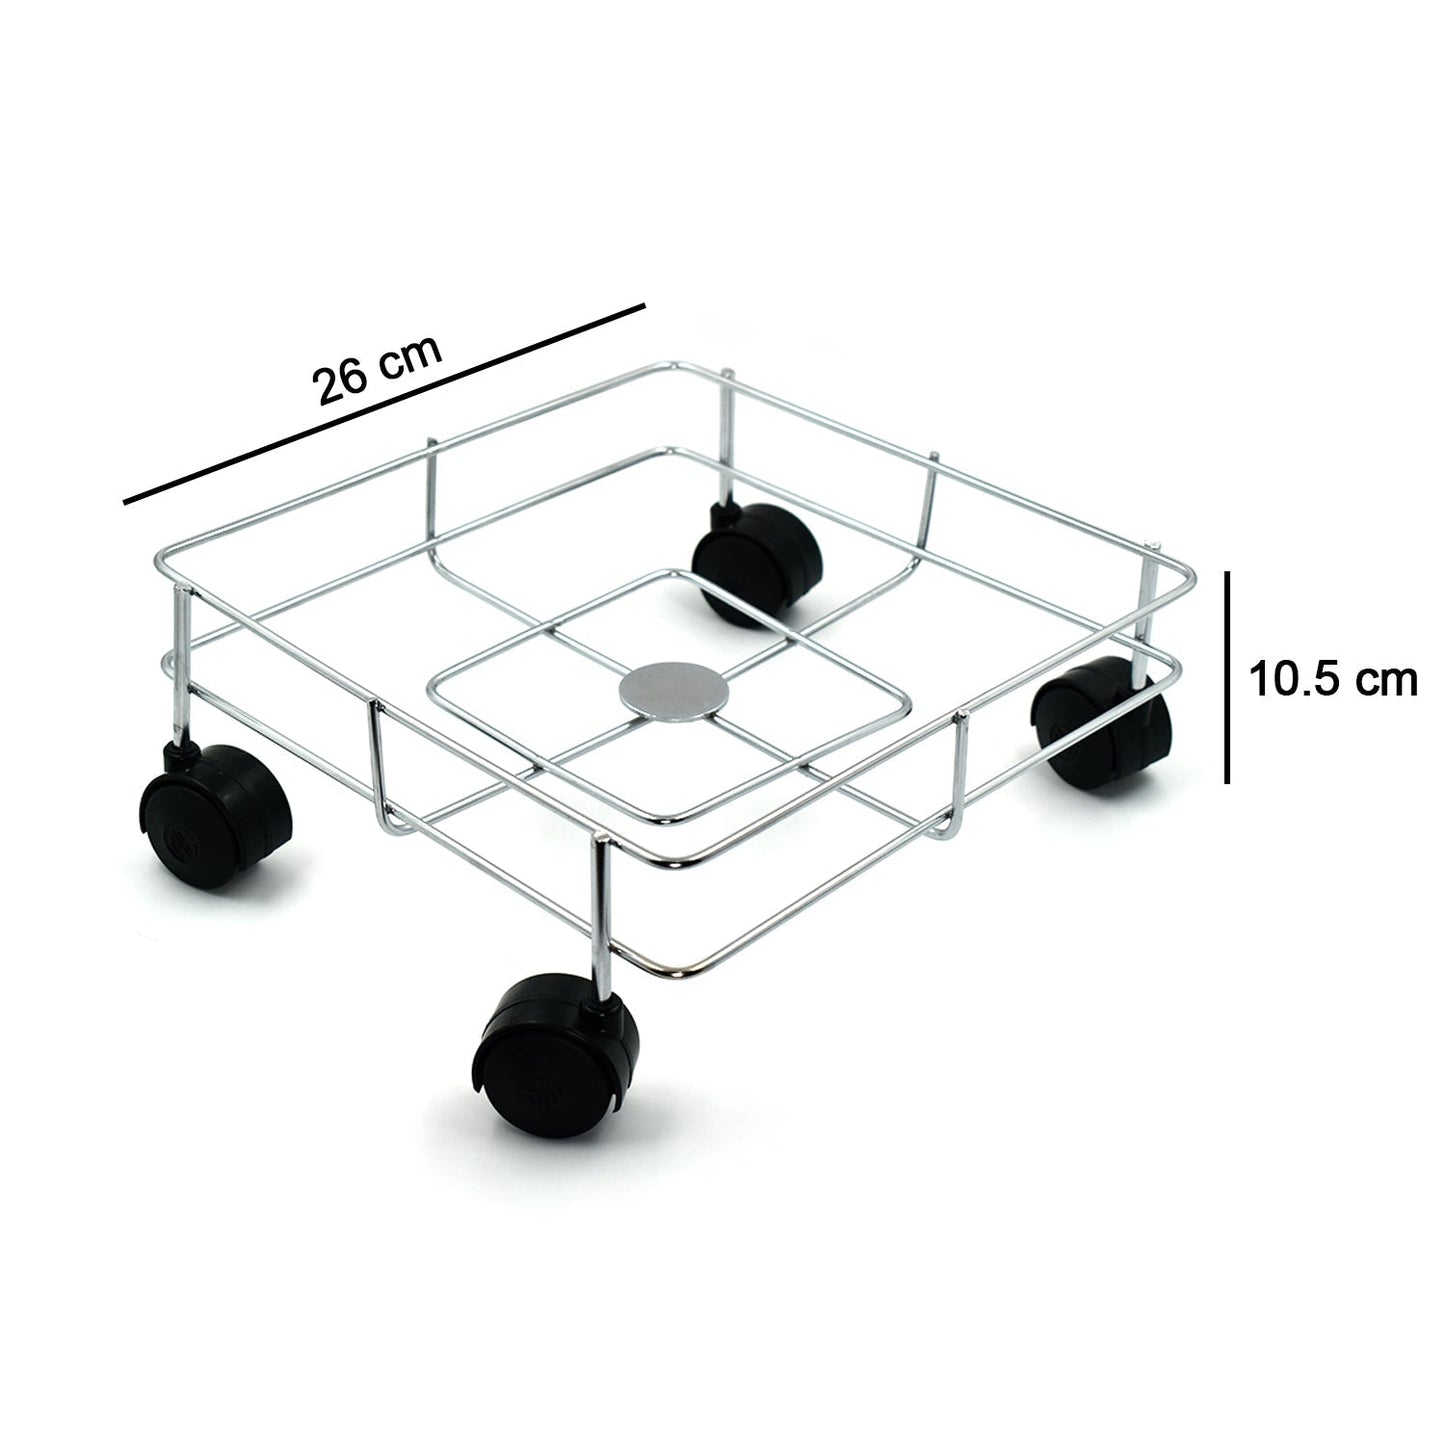 2787 Ss Square Oil Stand For Carrying Oil Bottles And Jars Easily Without Any Problem.